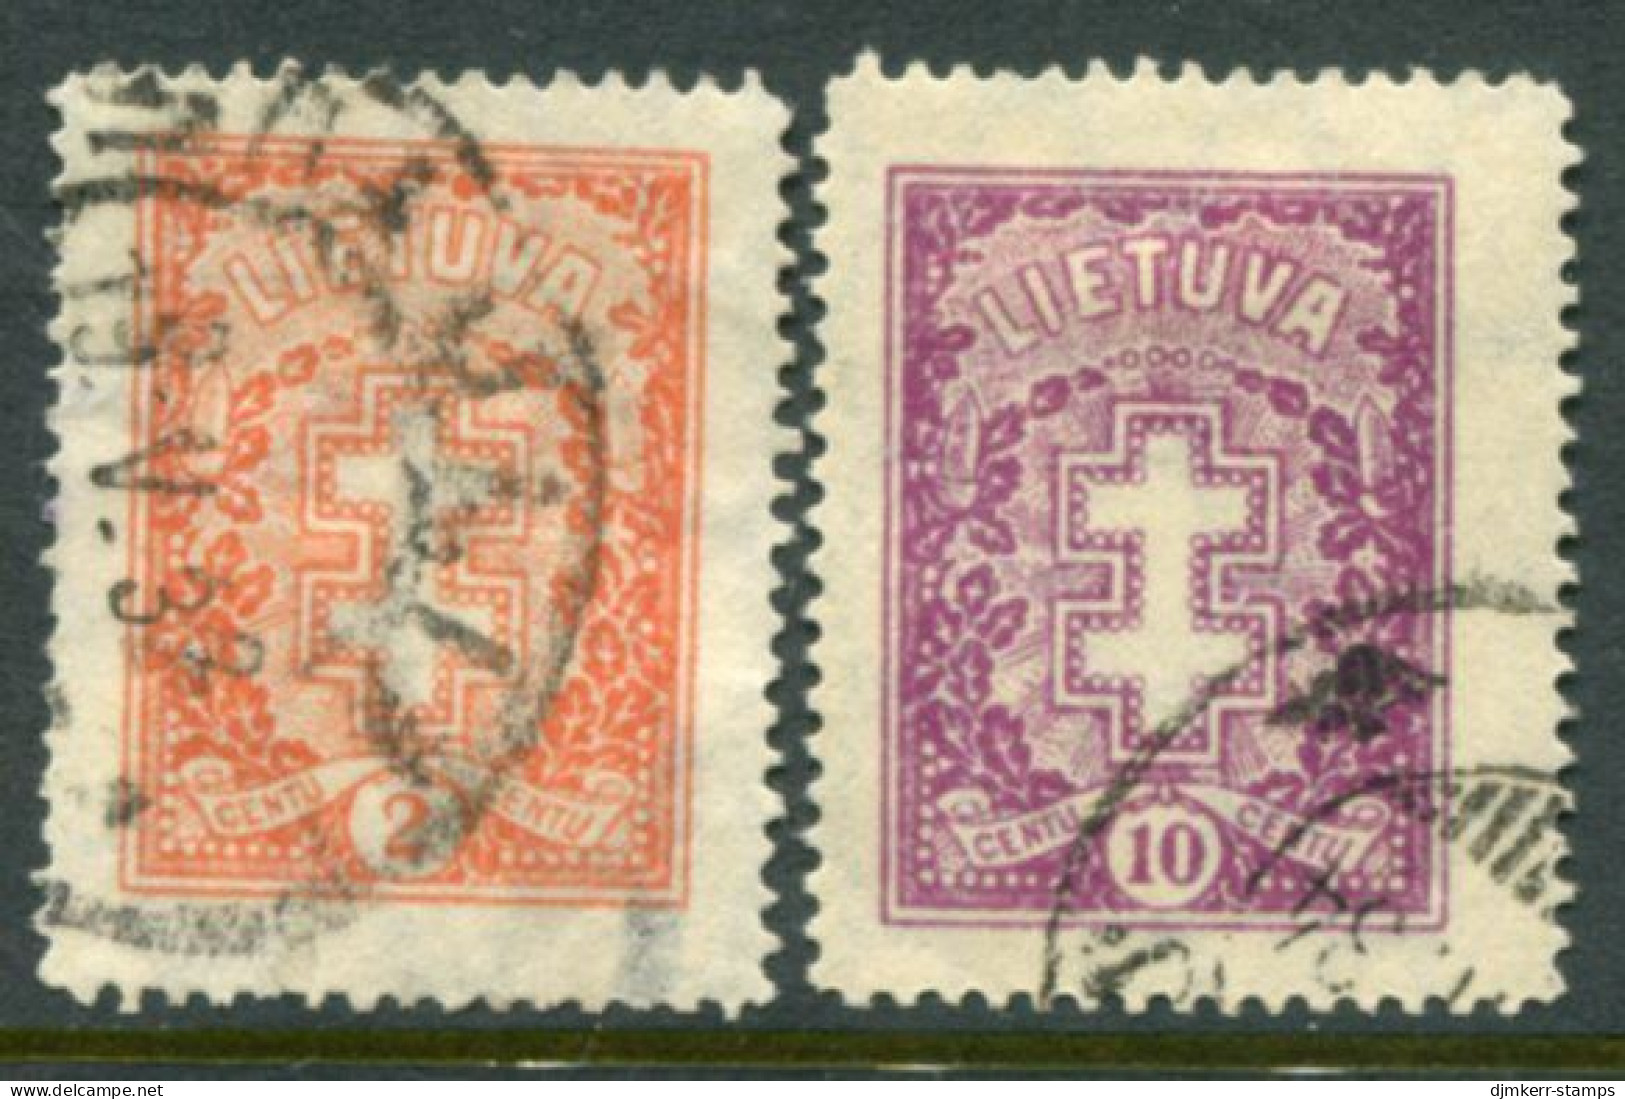 LITHUANIA 1931 Definitive 2 C, 10 C.  Used. Michel 314-15 - Lithuania